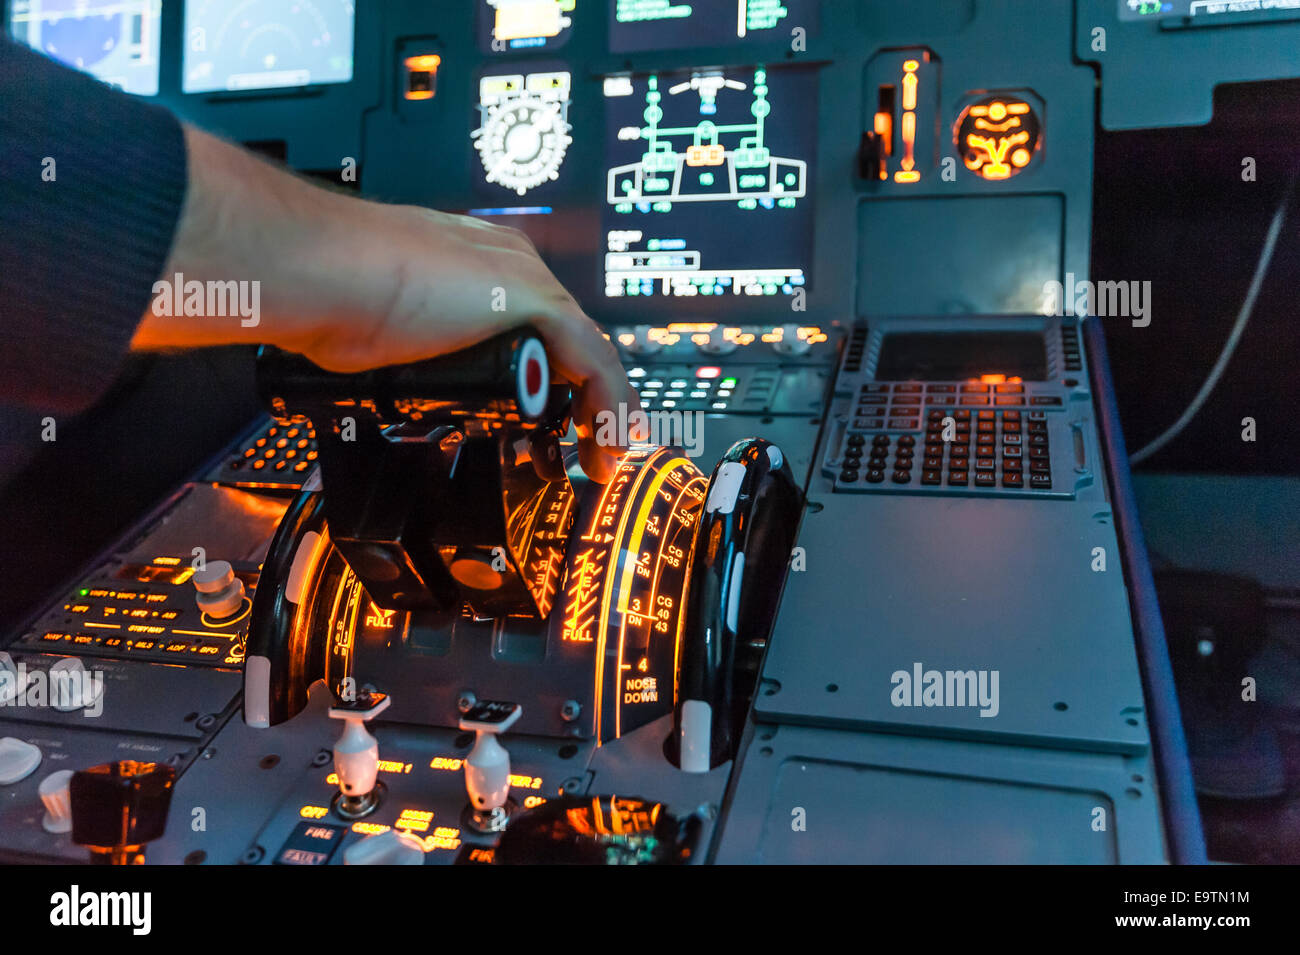 Cockpit of an Airbus A320 flight simulator that is used for training of professional airline pilots (hand on throttle lever) Stock Photo